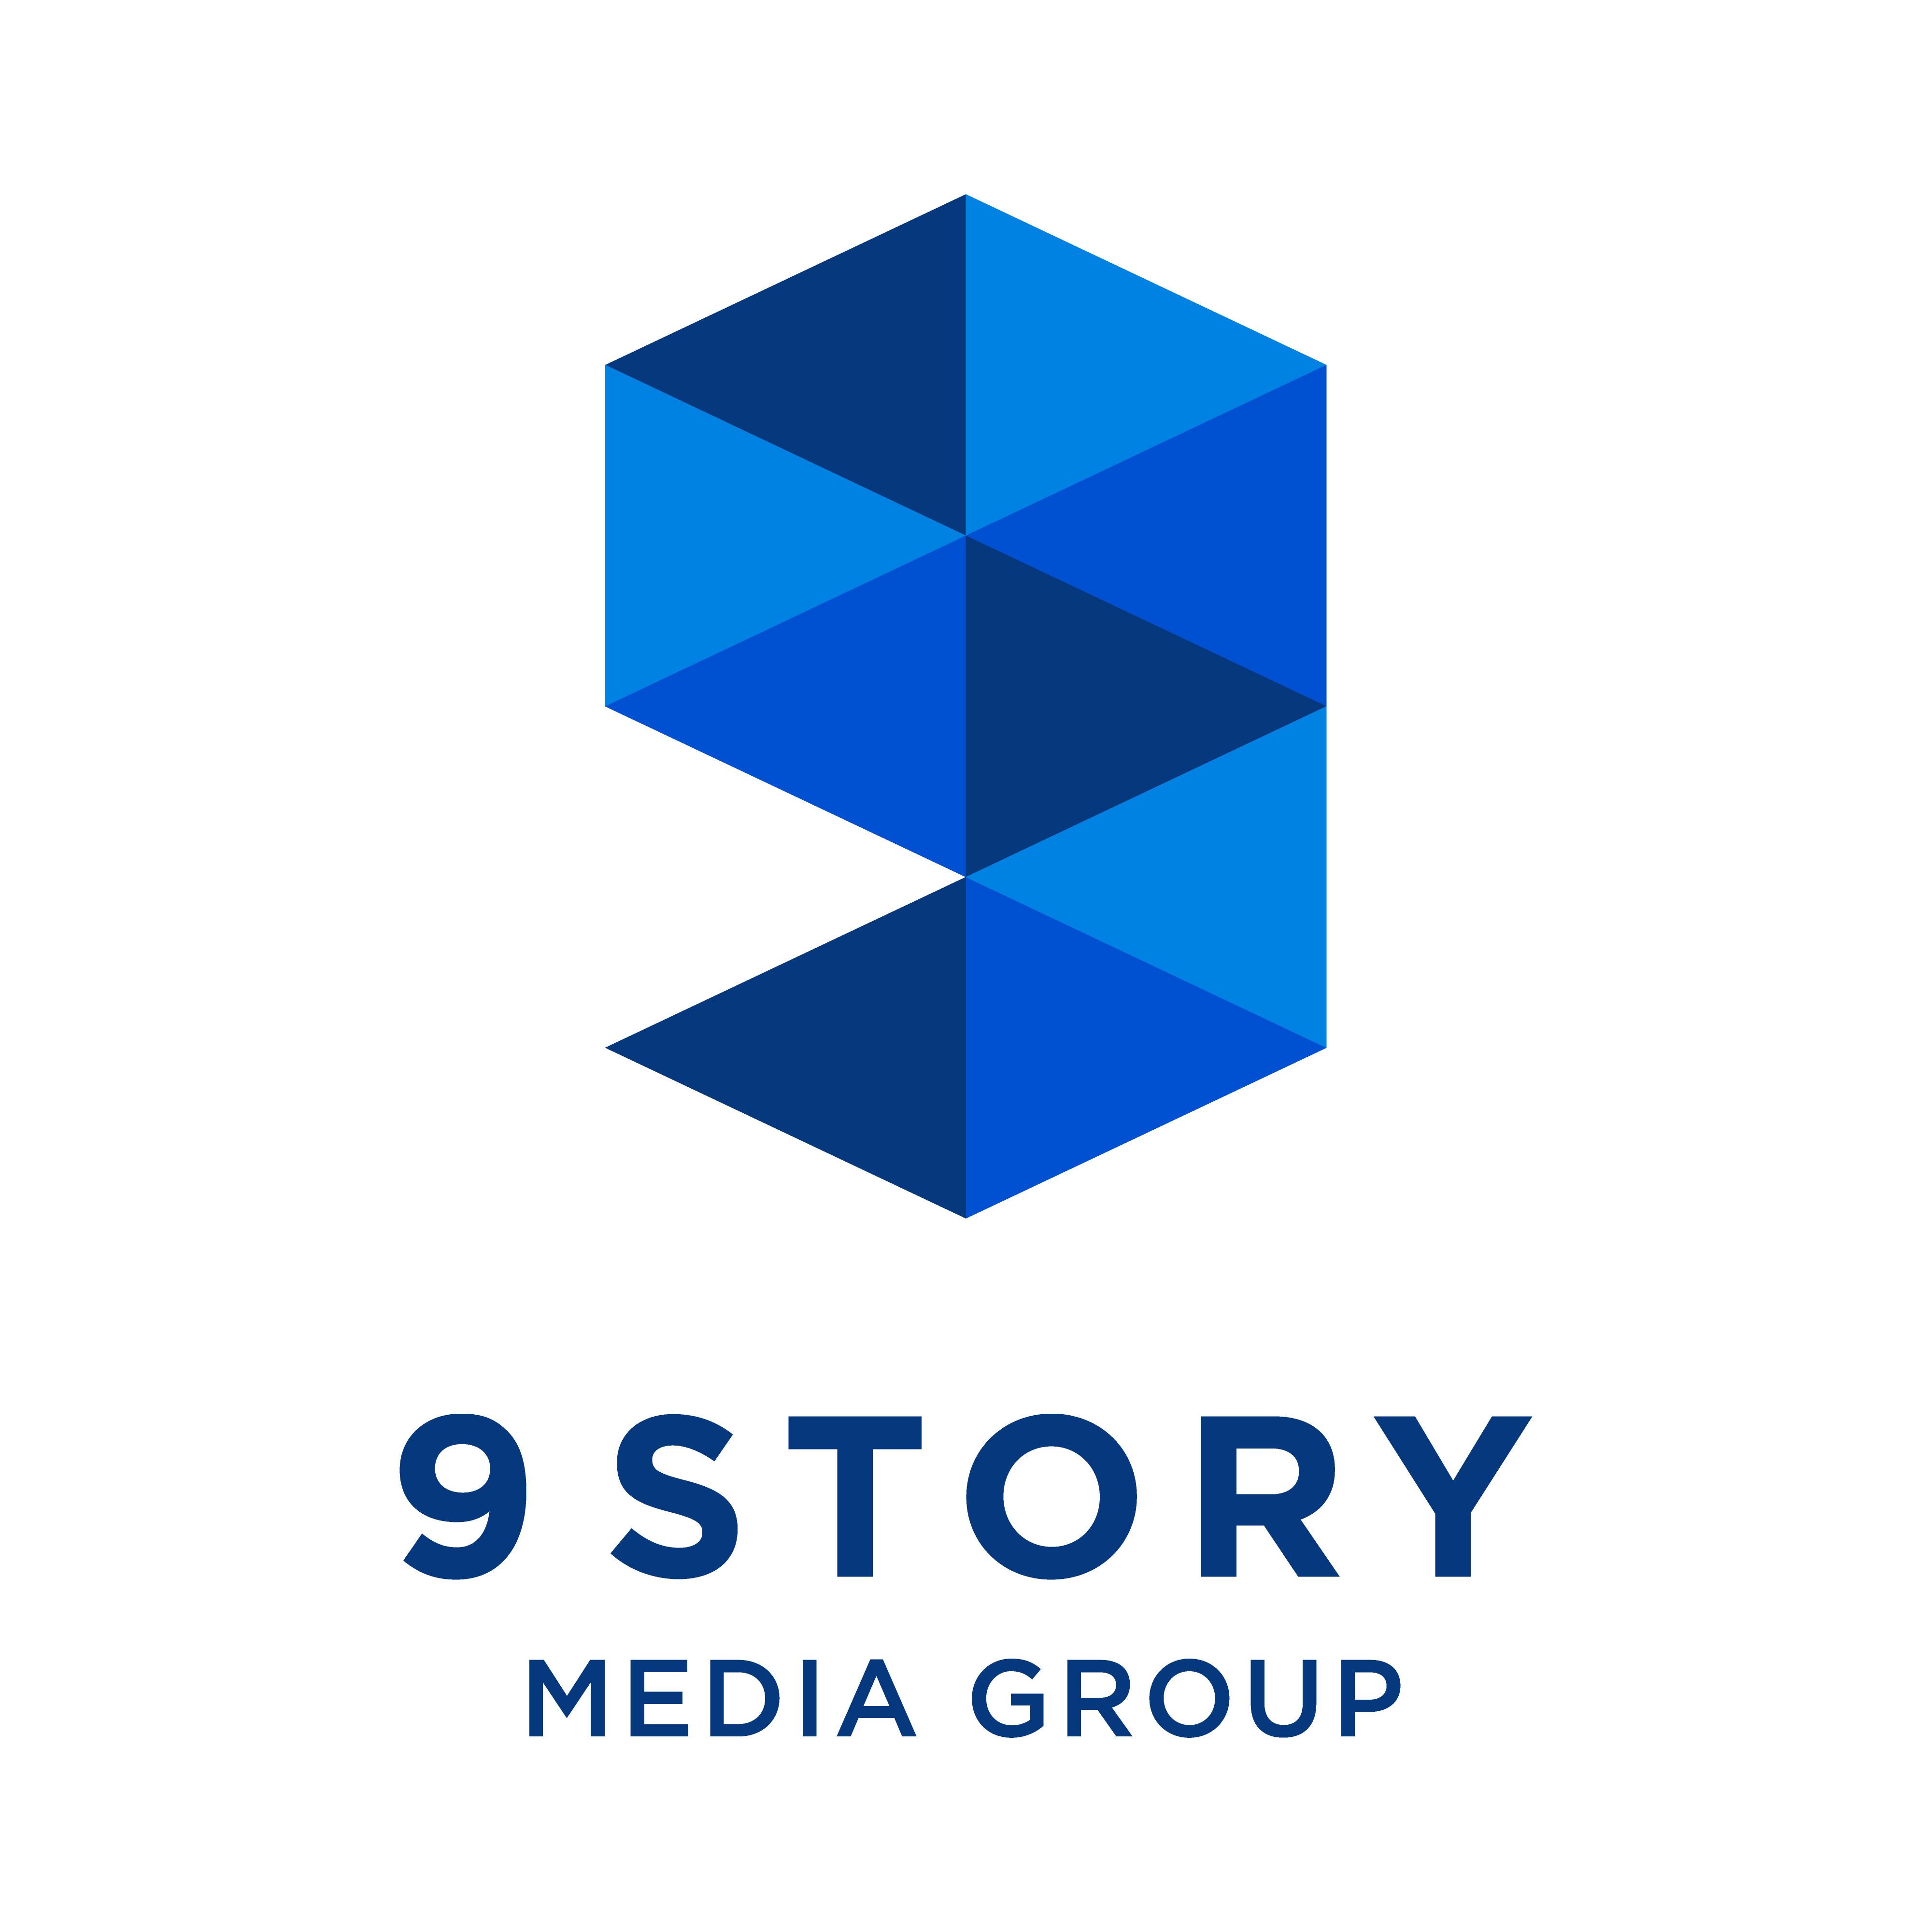 9 Story Appoints ANGELA C. SANTOMERO As Chief Creative Officer